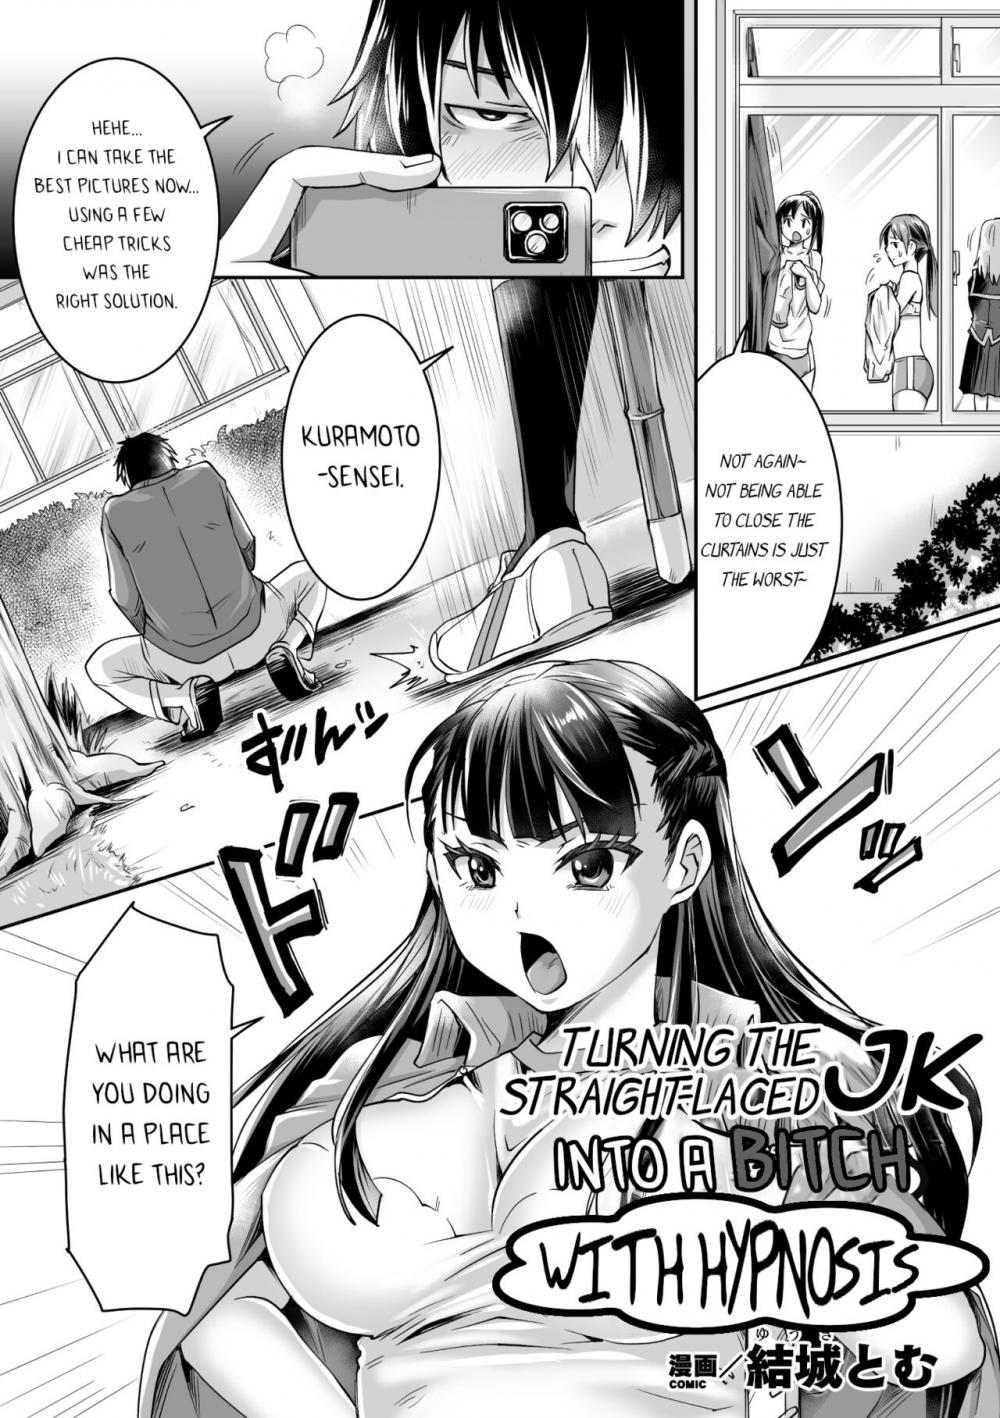 Hentai Manga Comic-I Tried To Turn A Straight-laced JK Into A Bitch With Hypnosis-Read-1